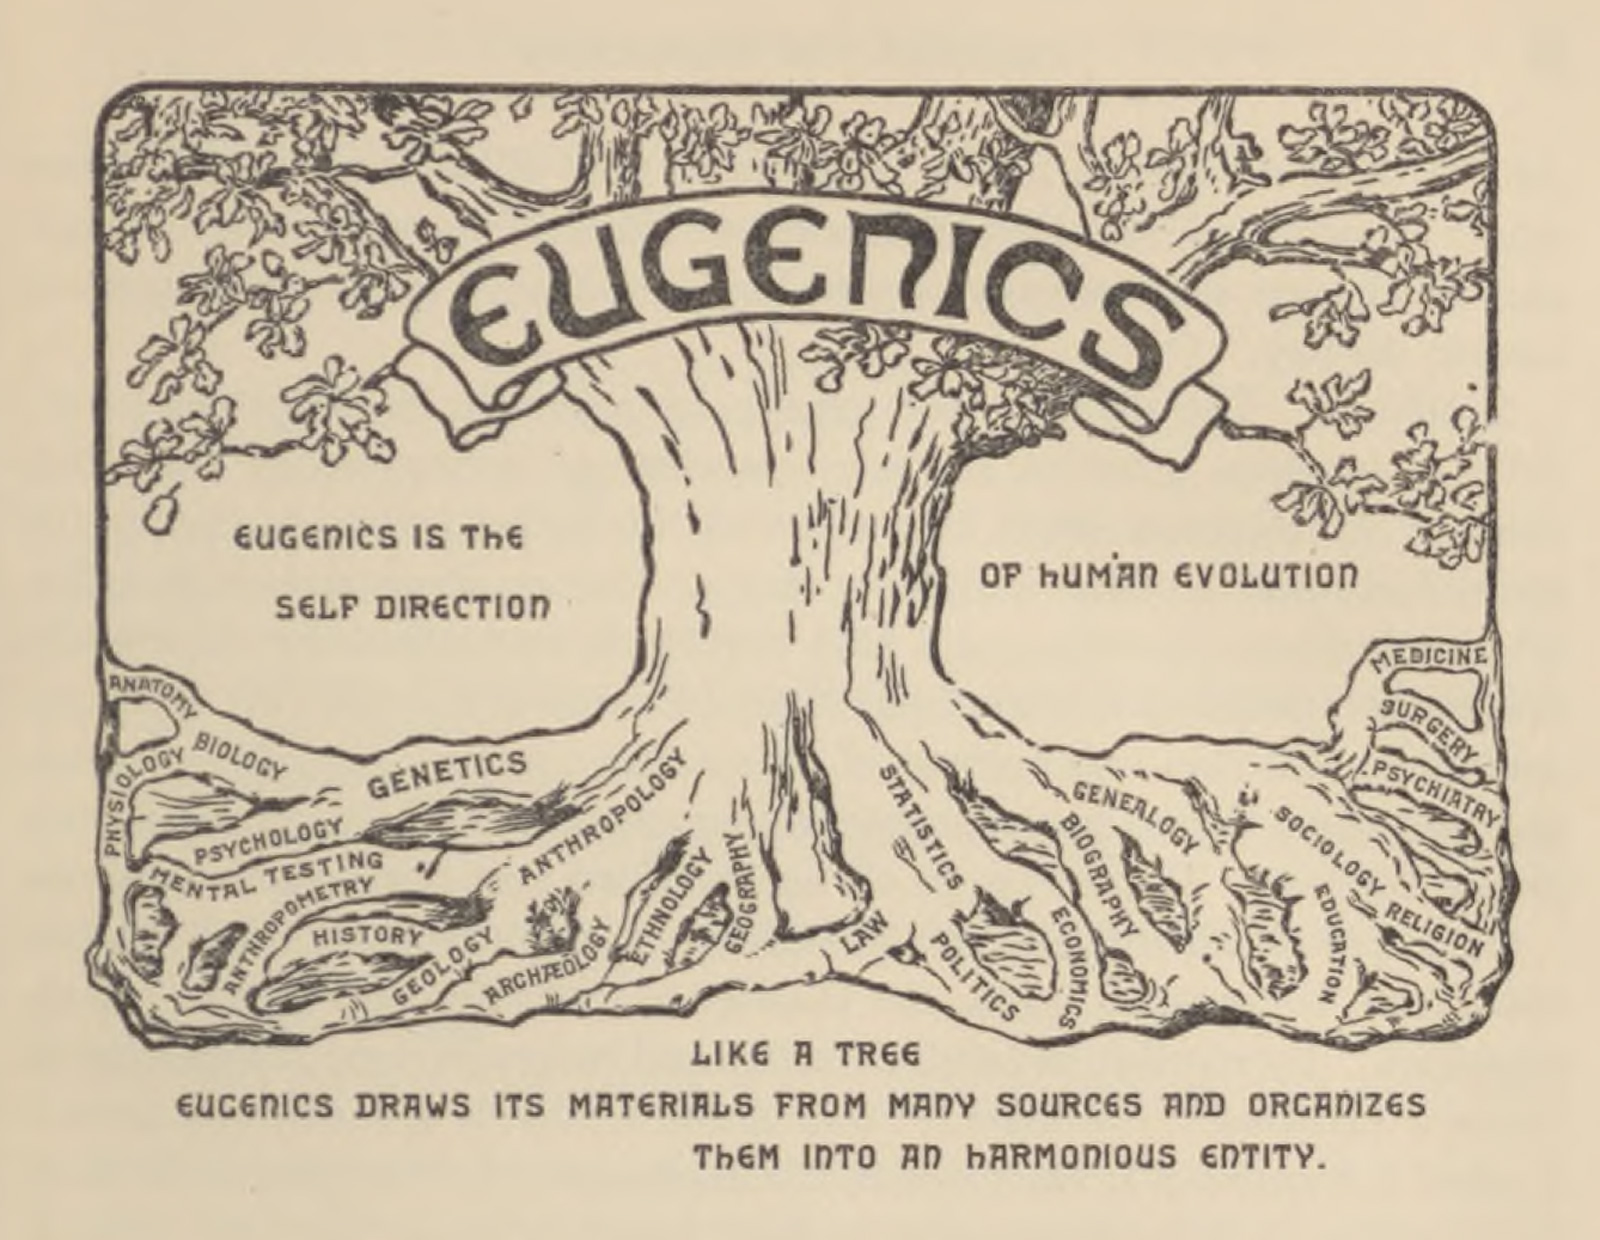 Page with text and a logo above showing a tree with the word “eugenics” emblazoned across it and various intellectual disciplines in the trees roots